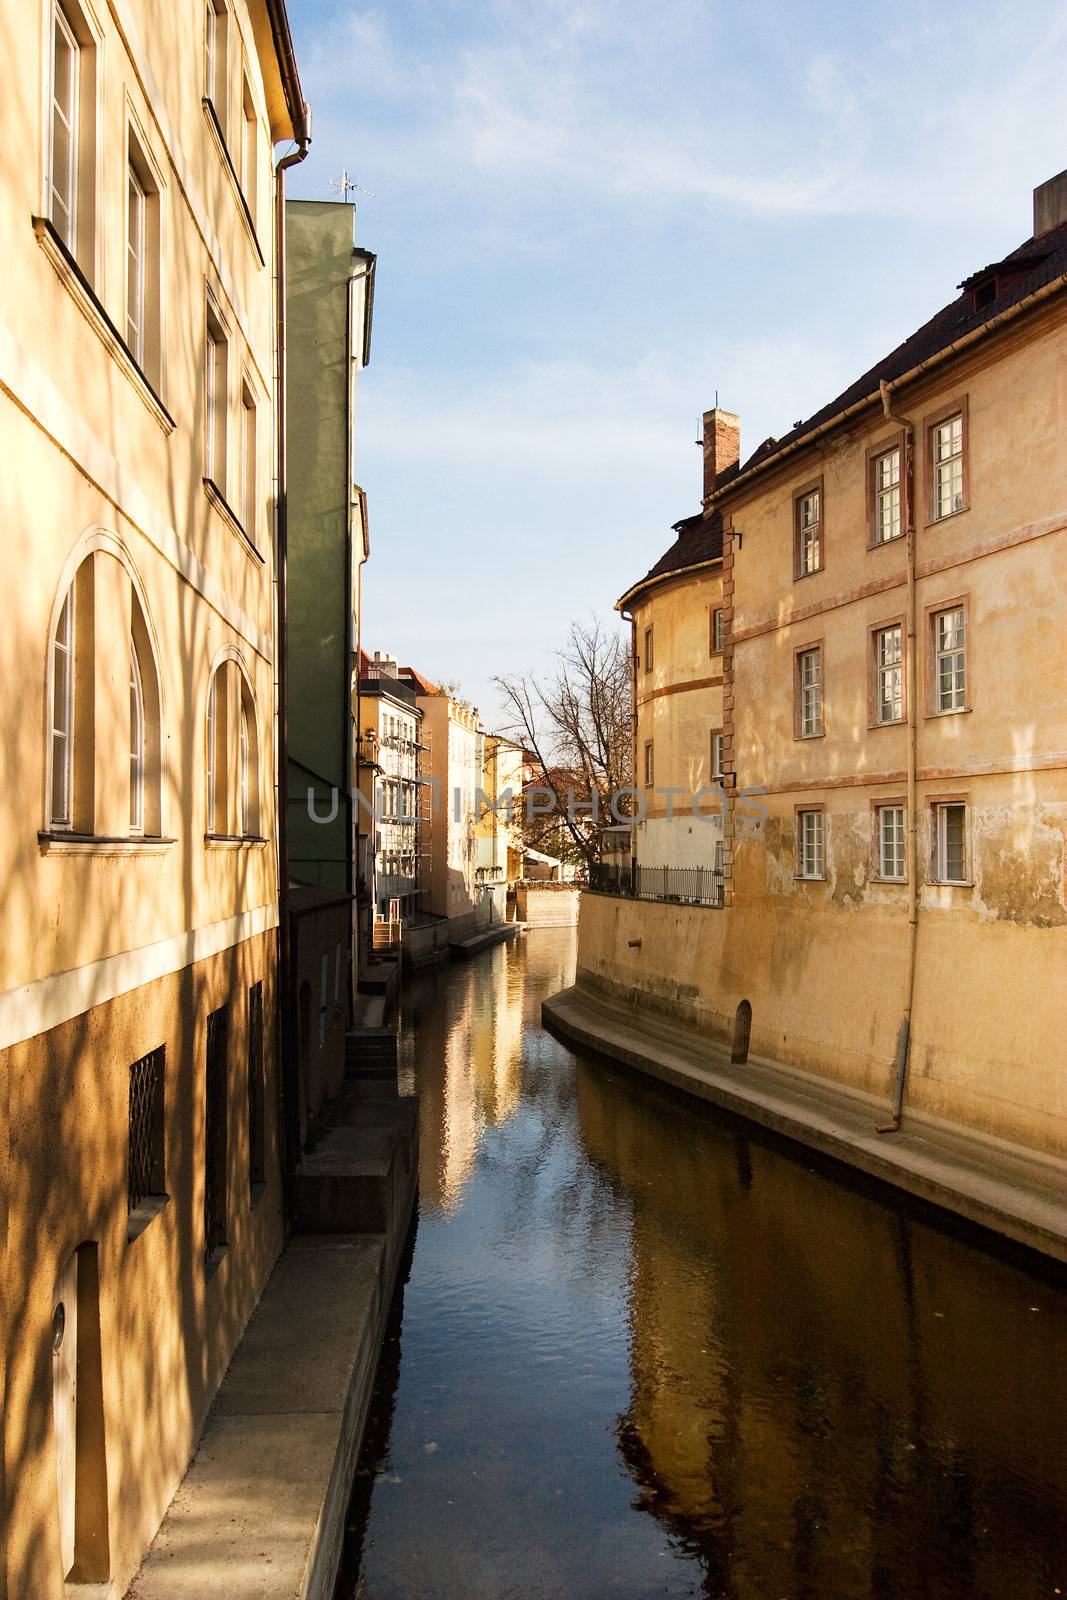 A small river flowing through the old town area of Prague, Czech Republic.